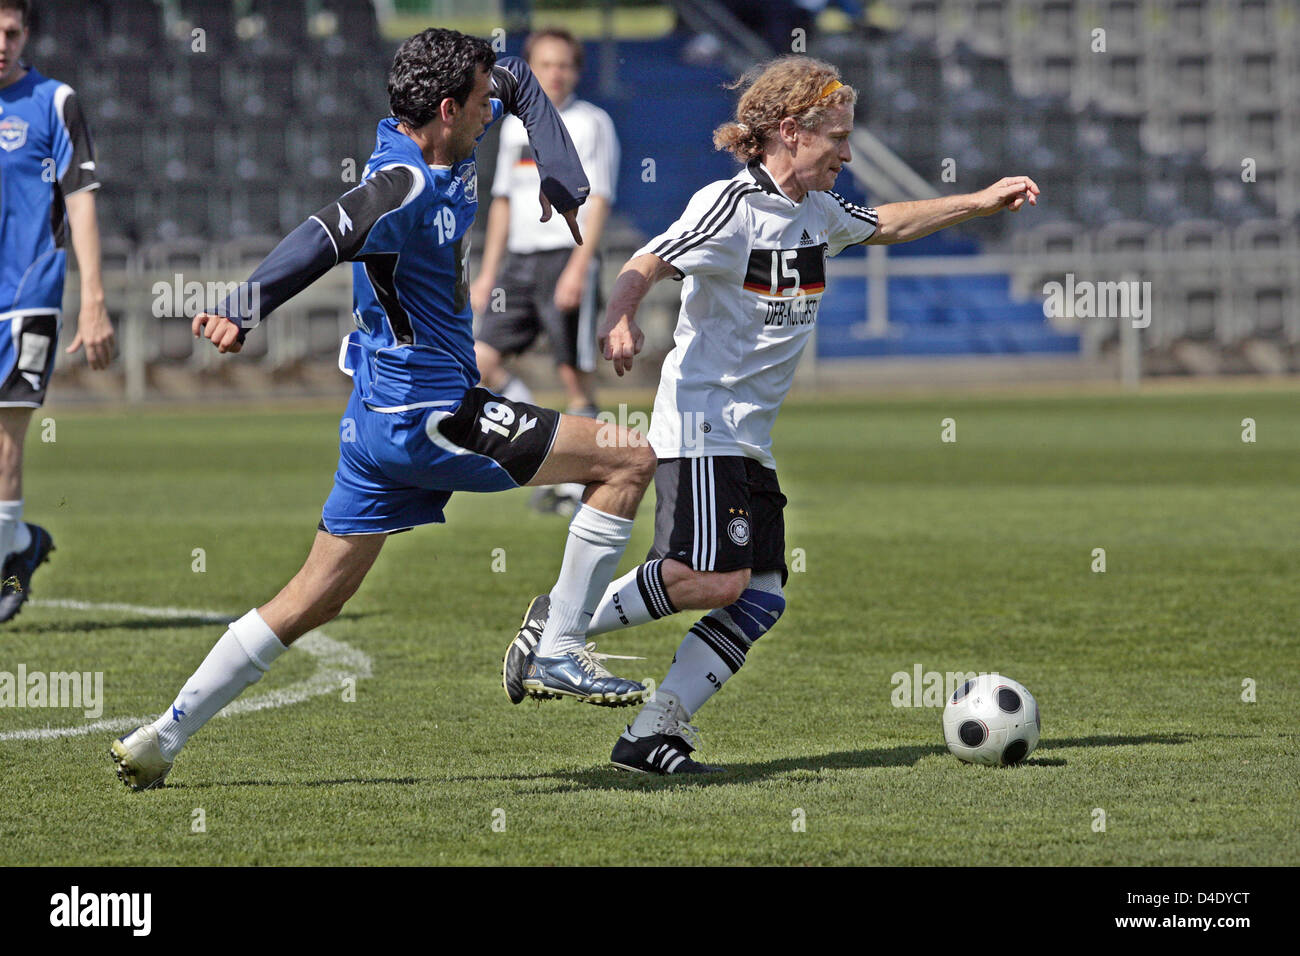 Klaus Doering of Germany (R) defends the ball against Isarel's Avi Shilon during a so-called 'Writers League' match at Wurfplatz stadium in Berlin, Germany, 06 May 2008. German and Israeli writers met for a match on invitation of the German Foreign Office and the German Football Federation (DFB) culture foundation. The newly found 'Writers League' aims to contribute to the nations' Stock Photo